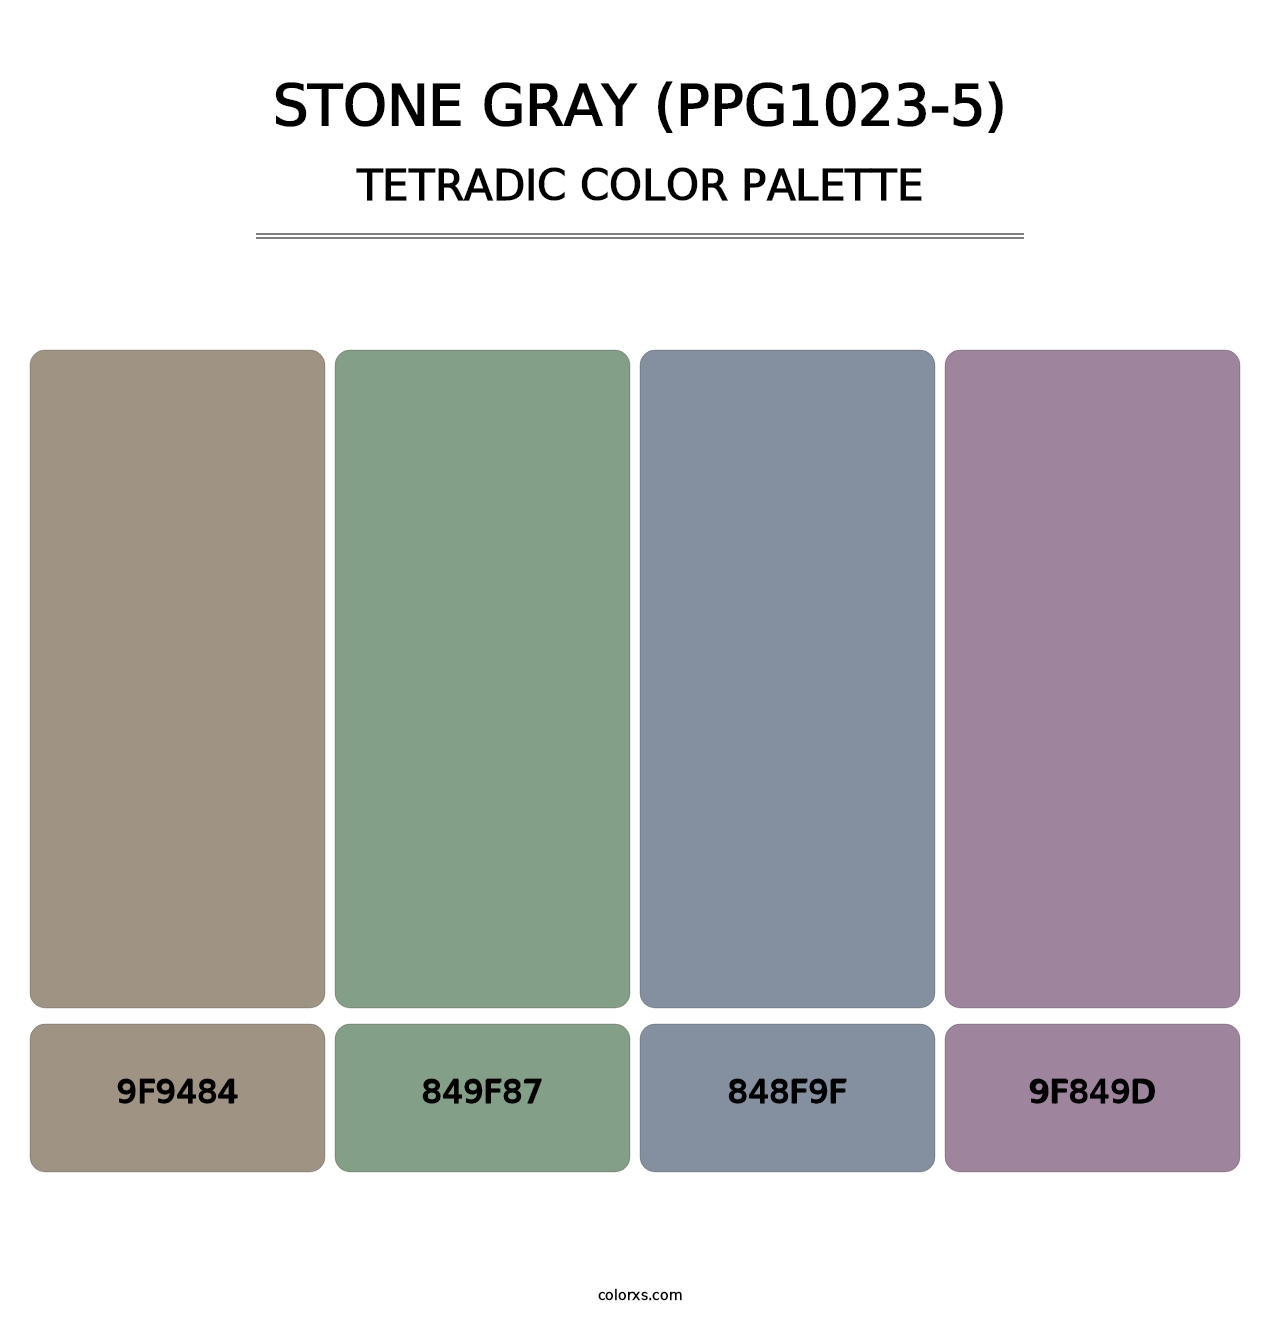 Stone Gray (PPG1023-5) - Tetradic Color Palette